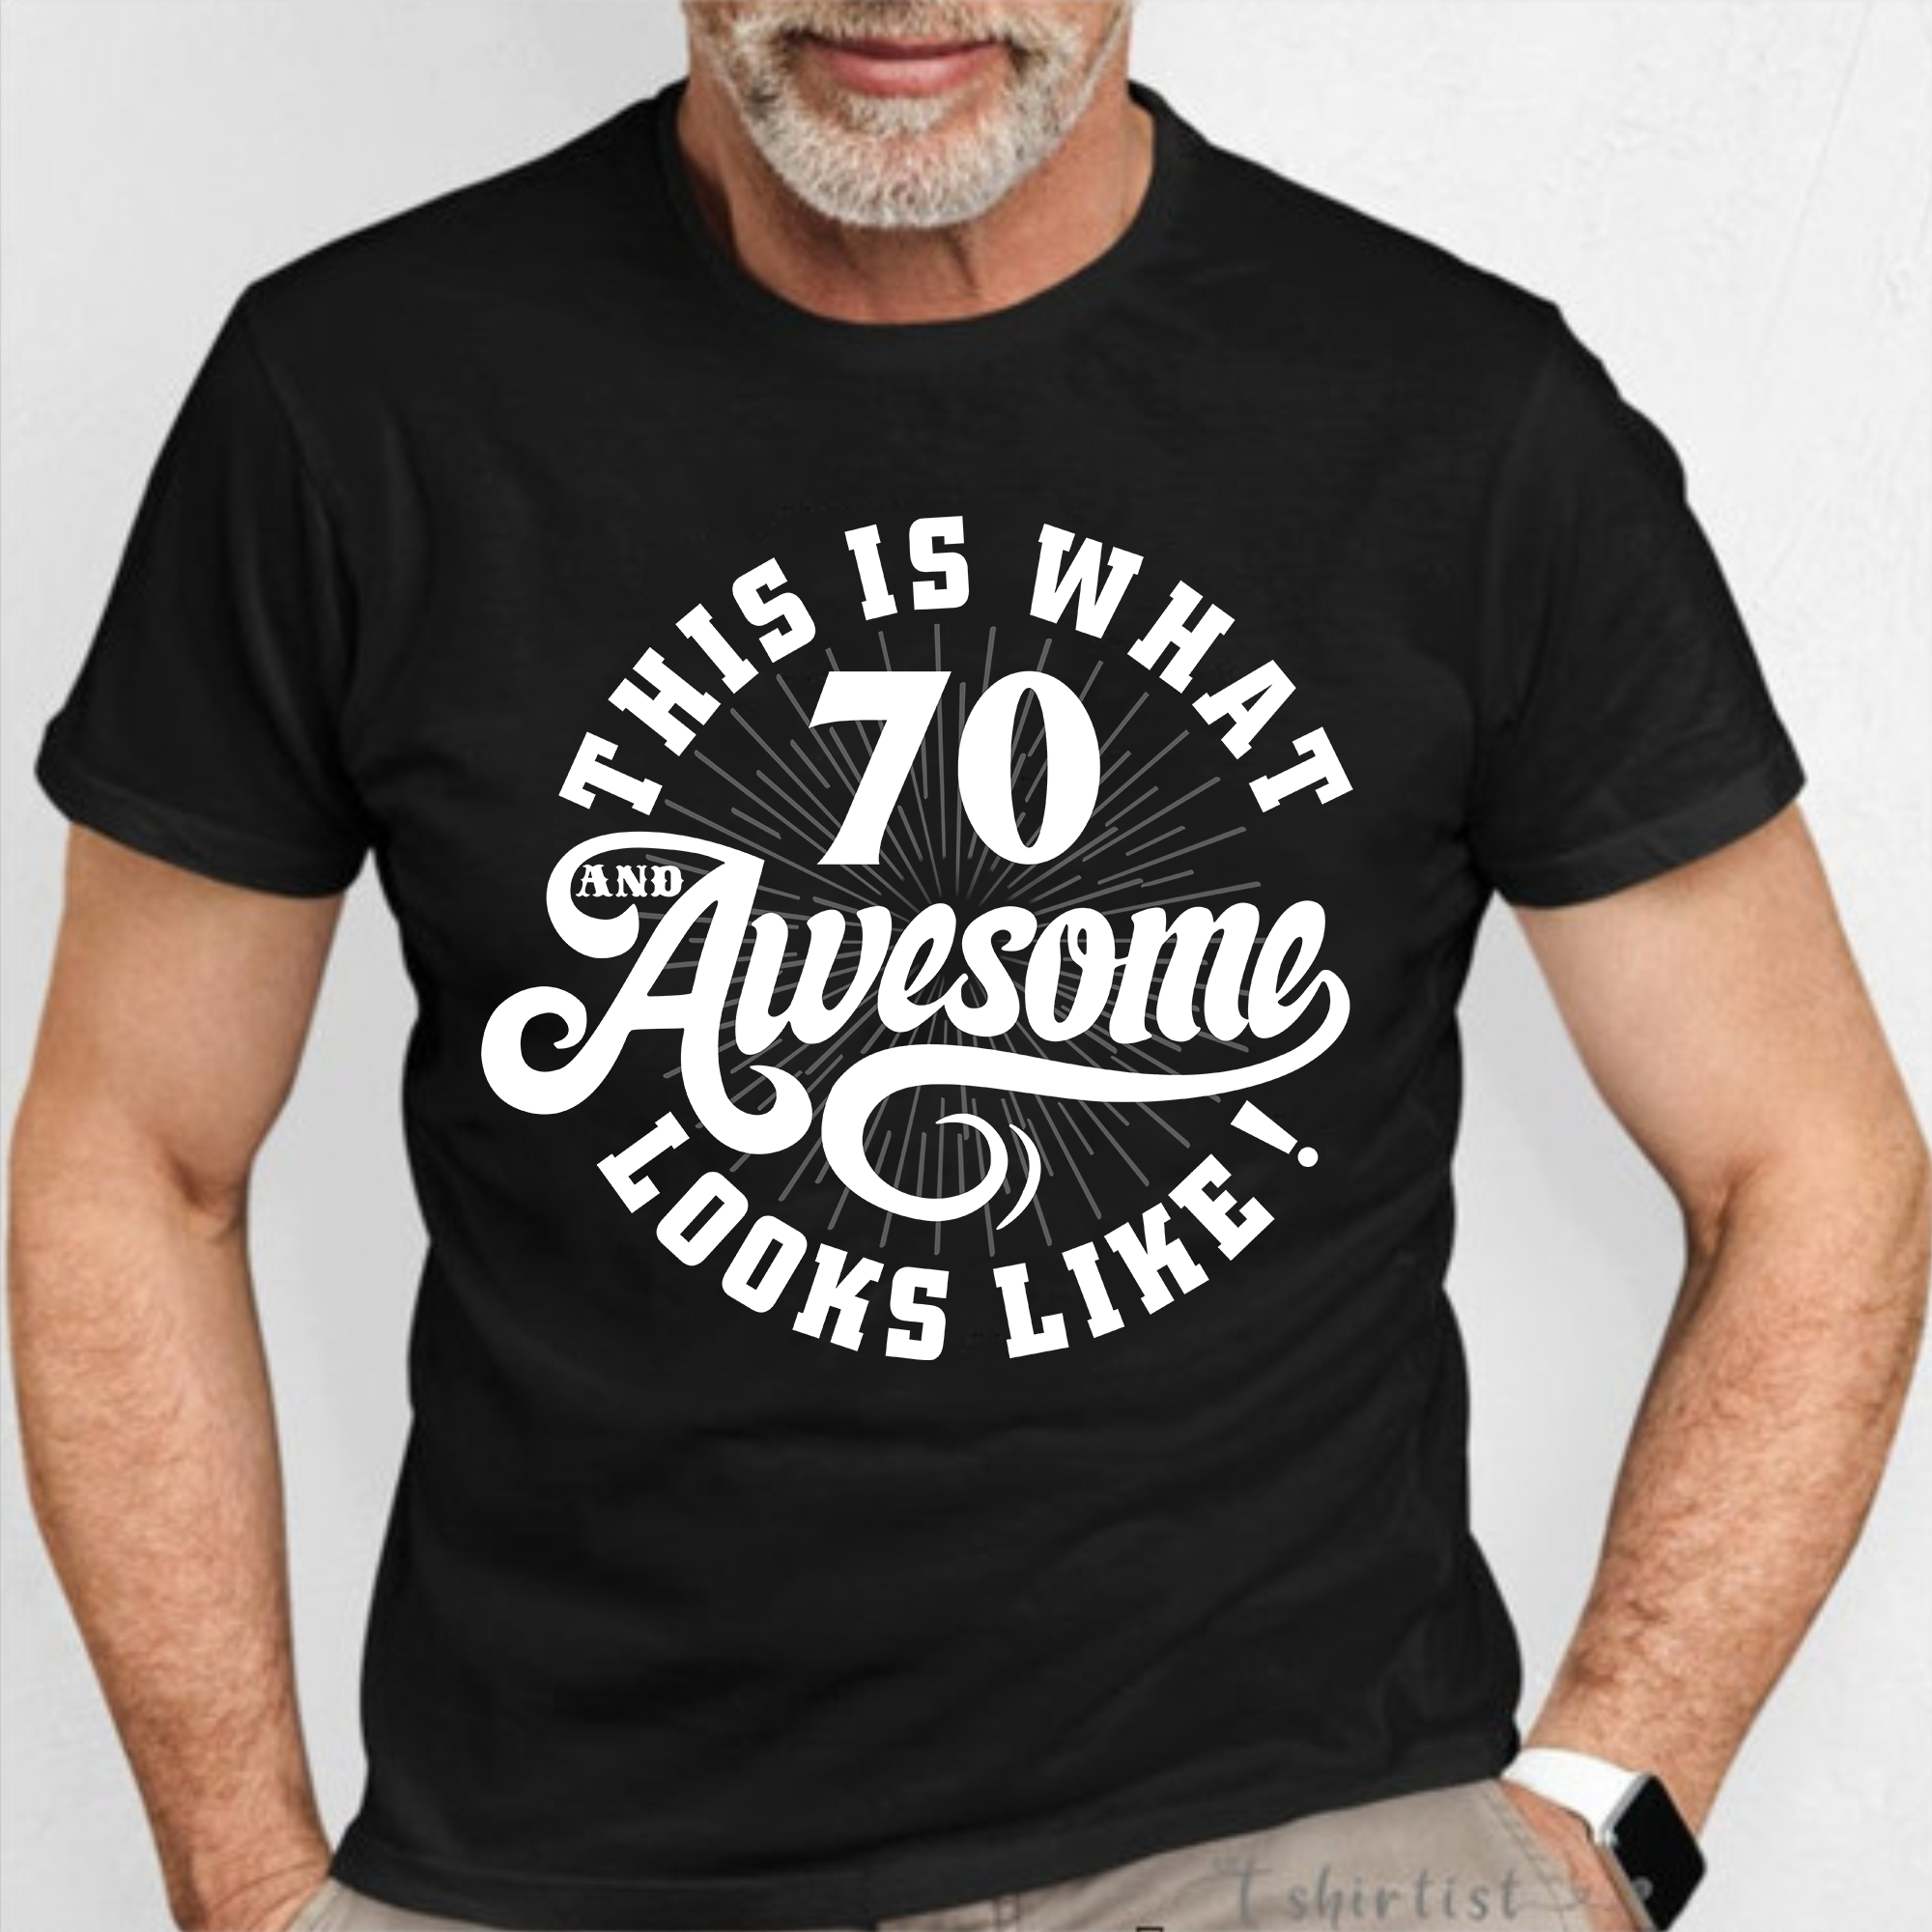 This Is What 70 Awesome Looks Like – Happy 70th Birthday Shirt